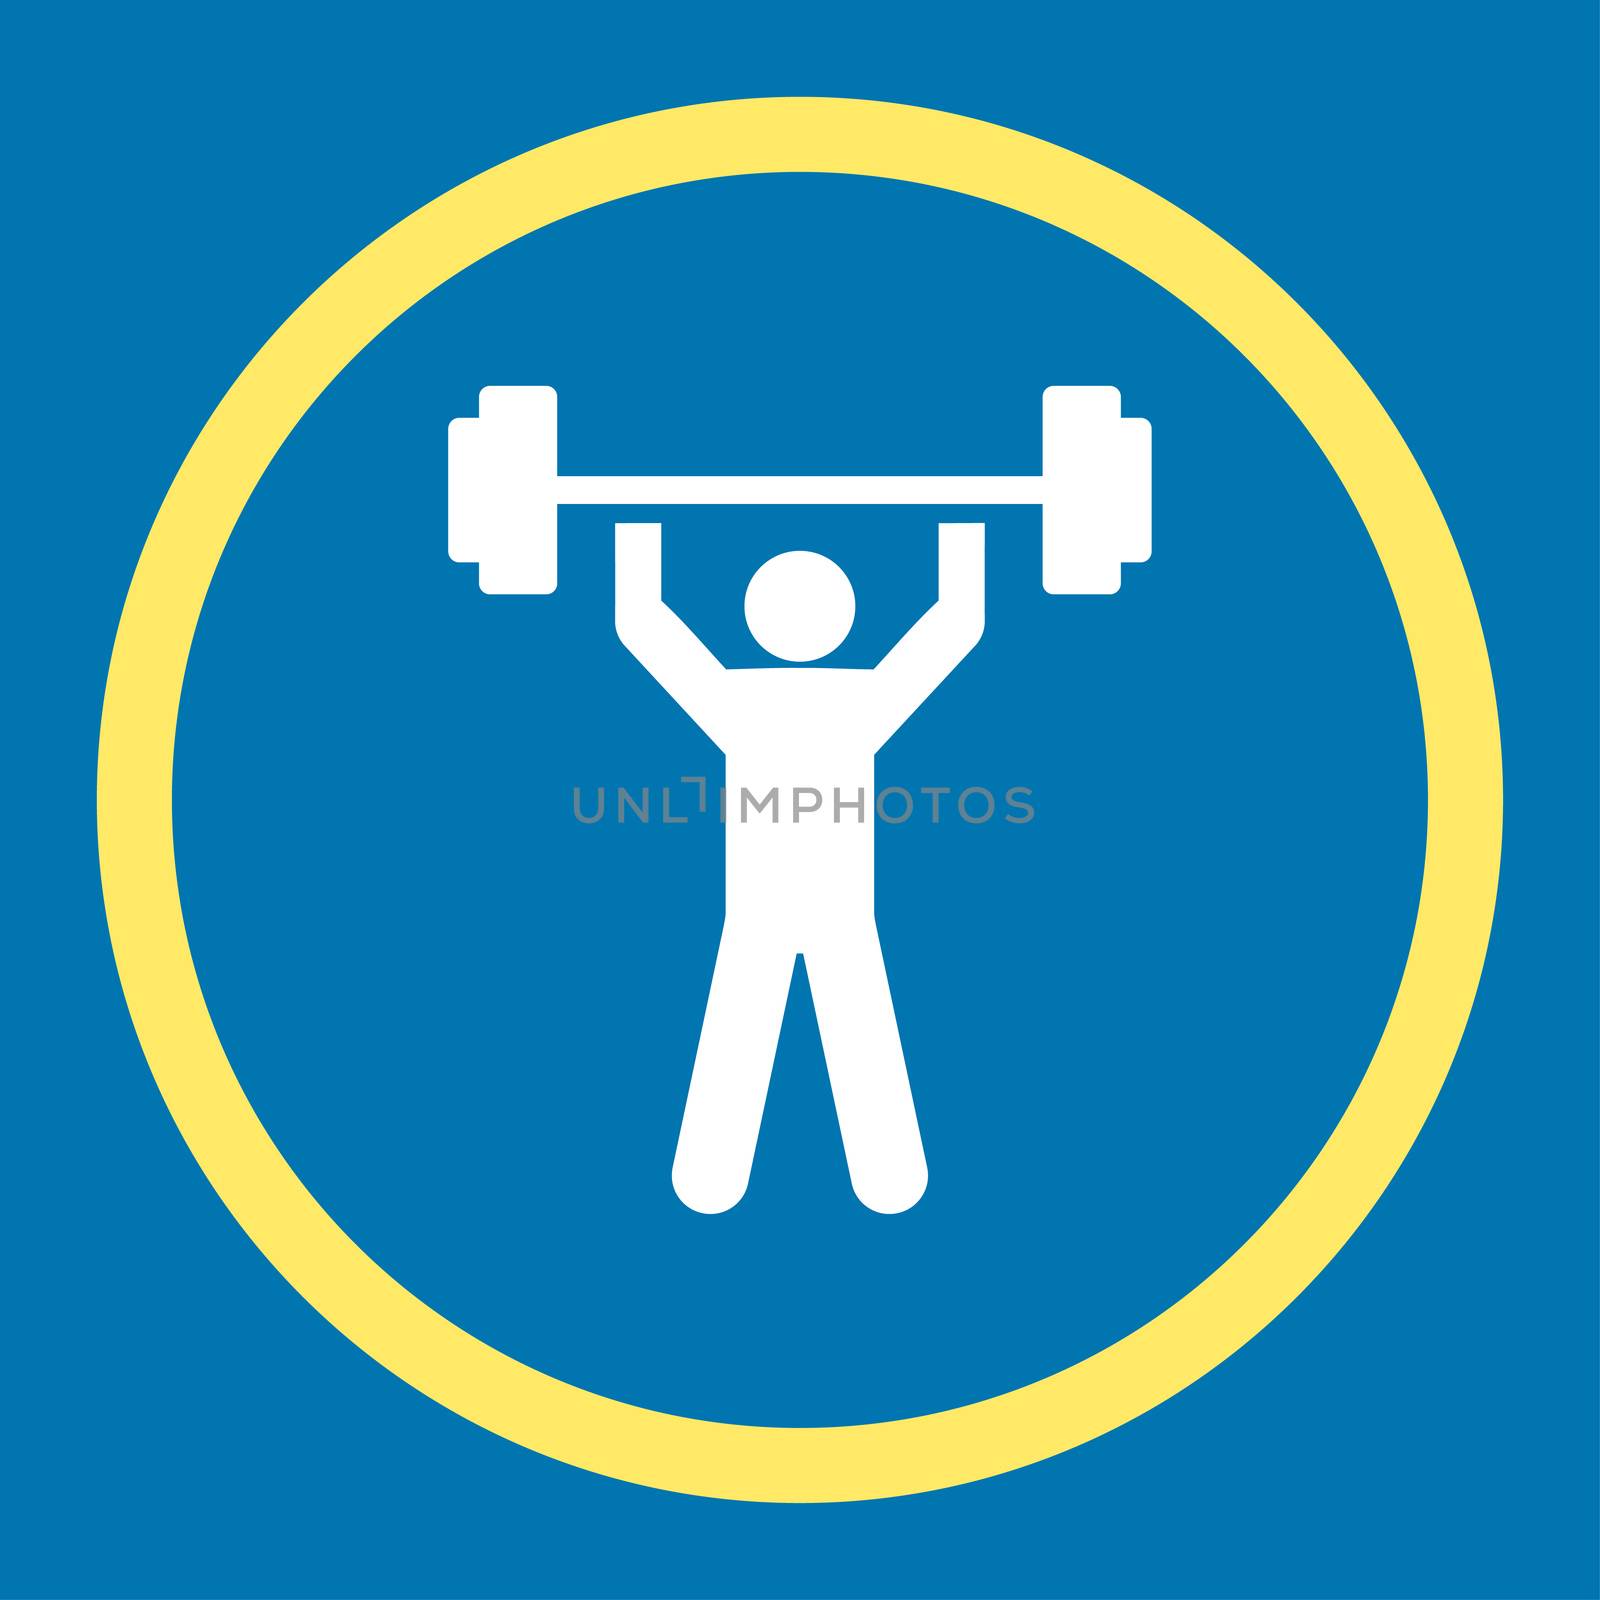 Power lifting icon. This rounded flat symbol is drawn with yellow and white colors on a blue background.